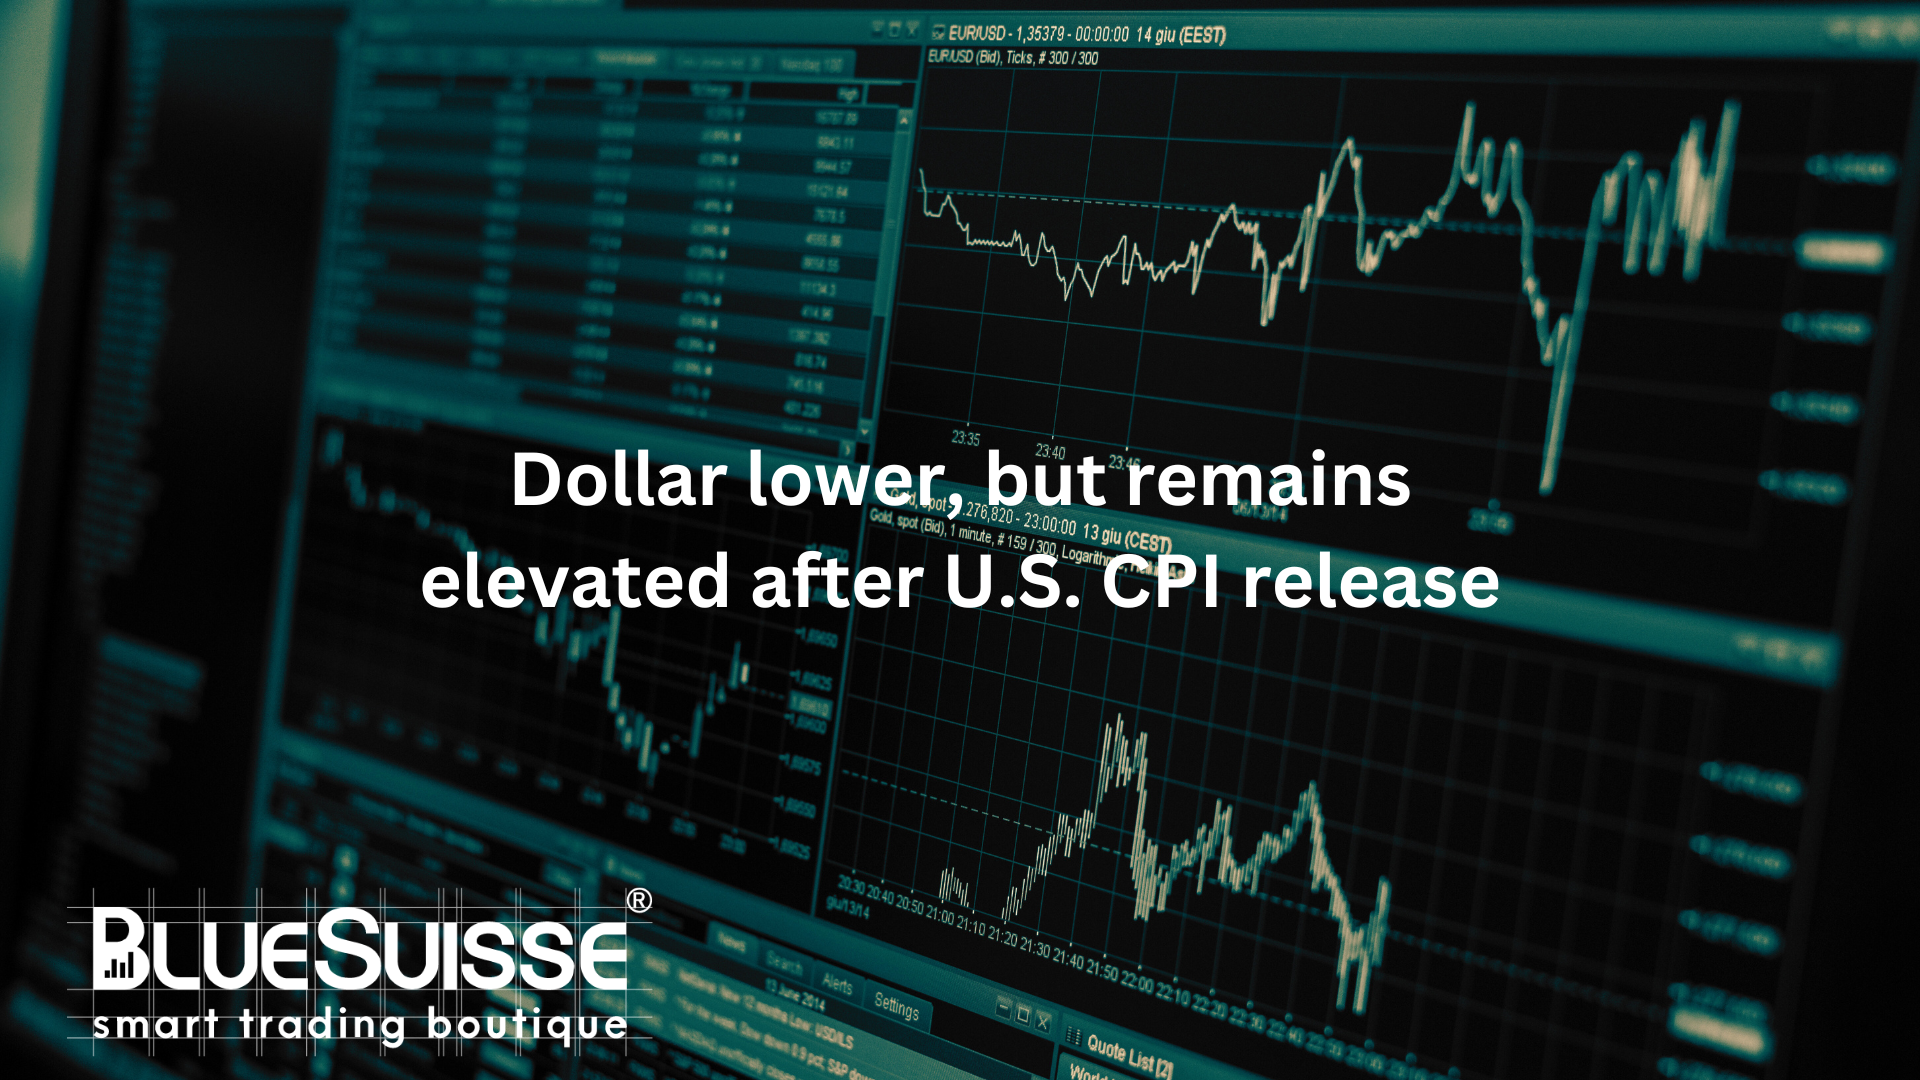 Dollar lower, but remains elevated after U.S. CPI release